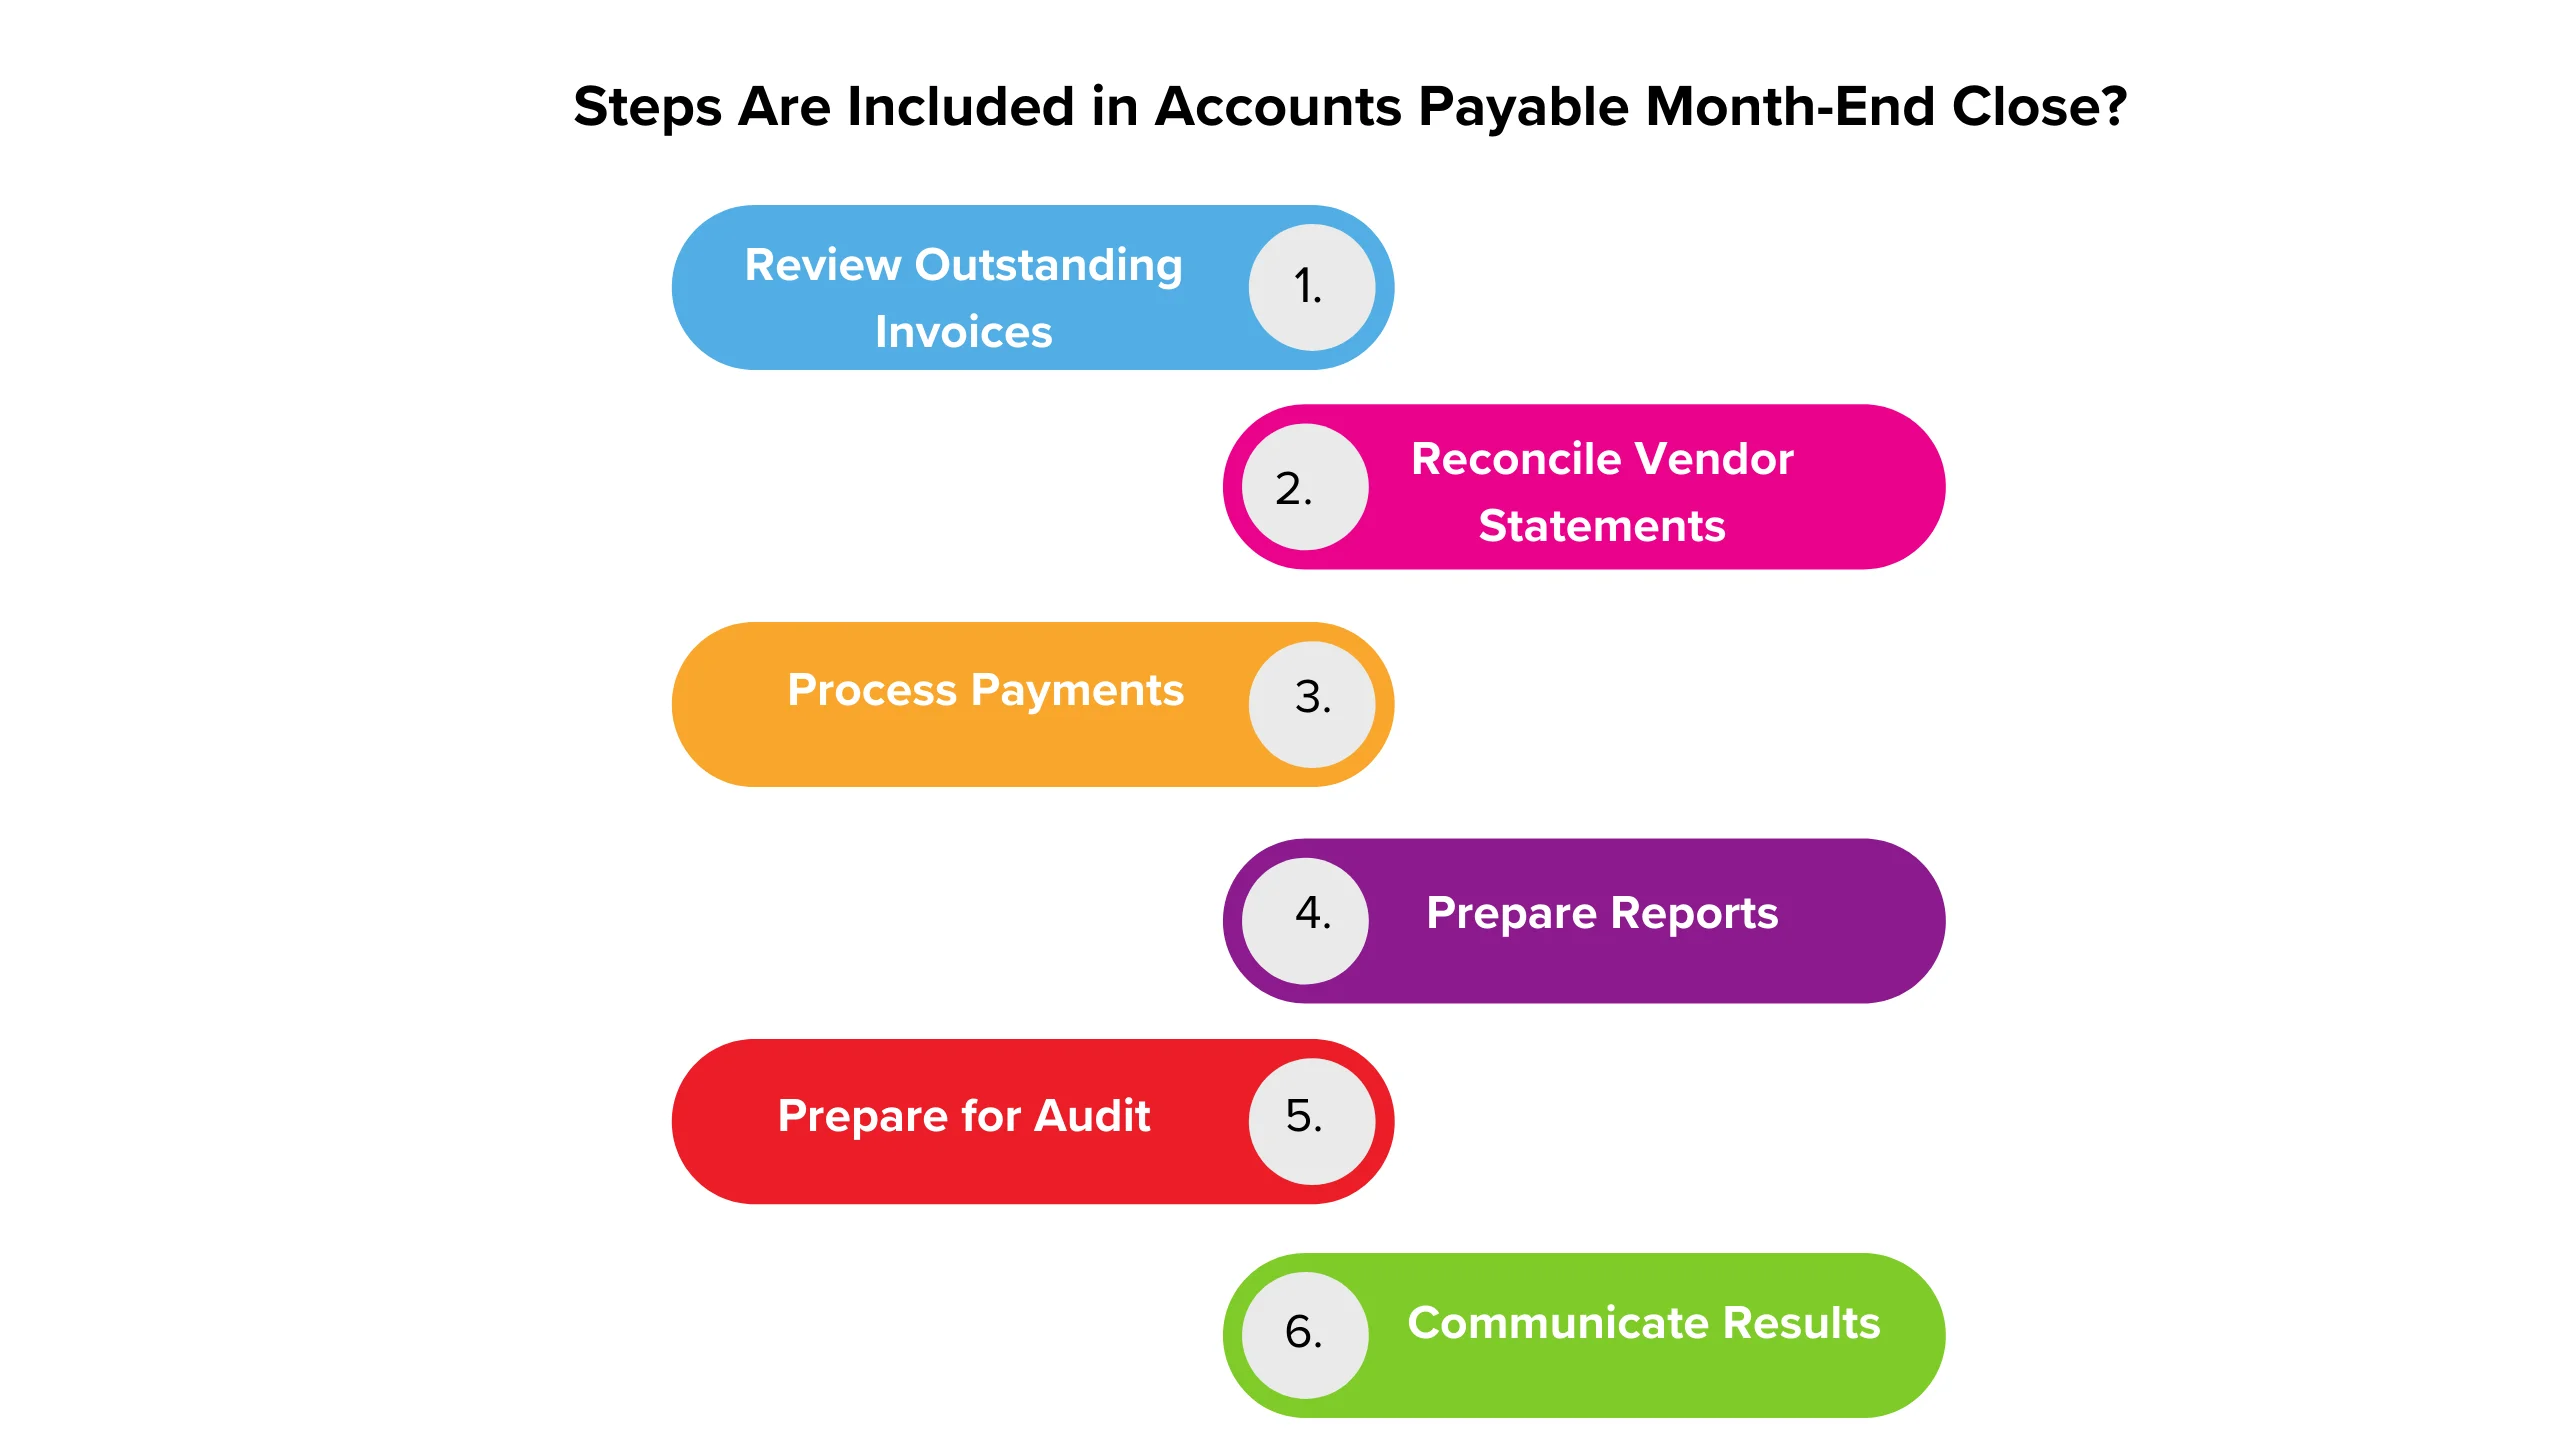 The accounts payable month-end close is the process of finalising all accounts payable transactions for the month.